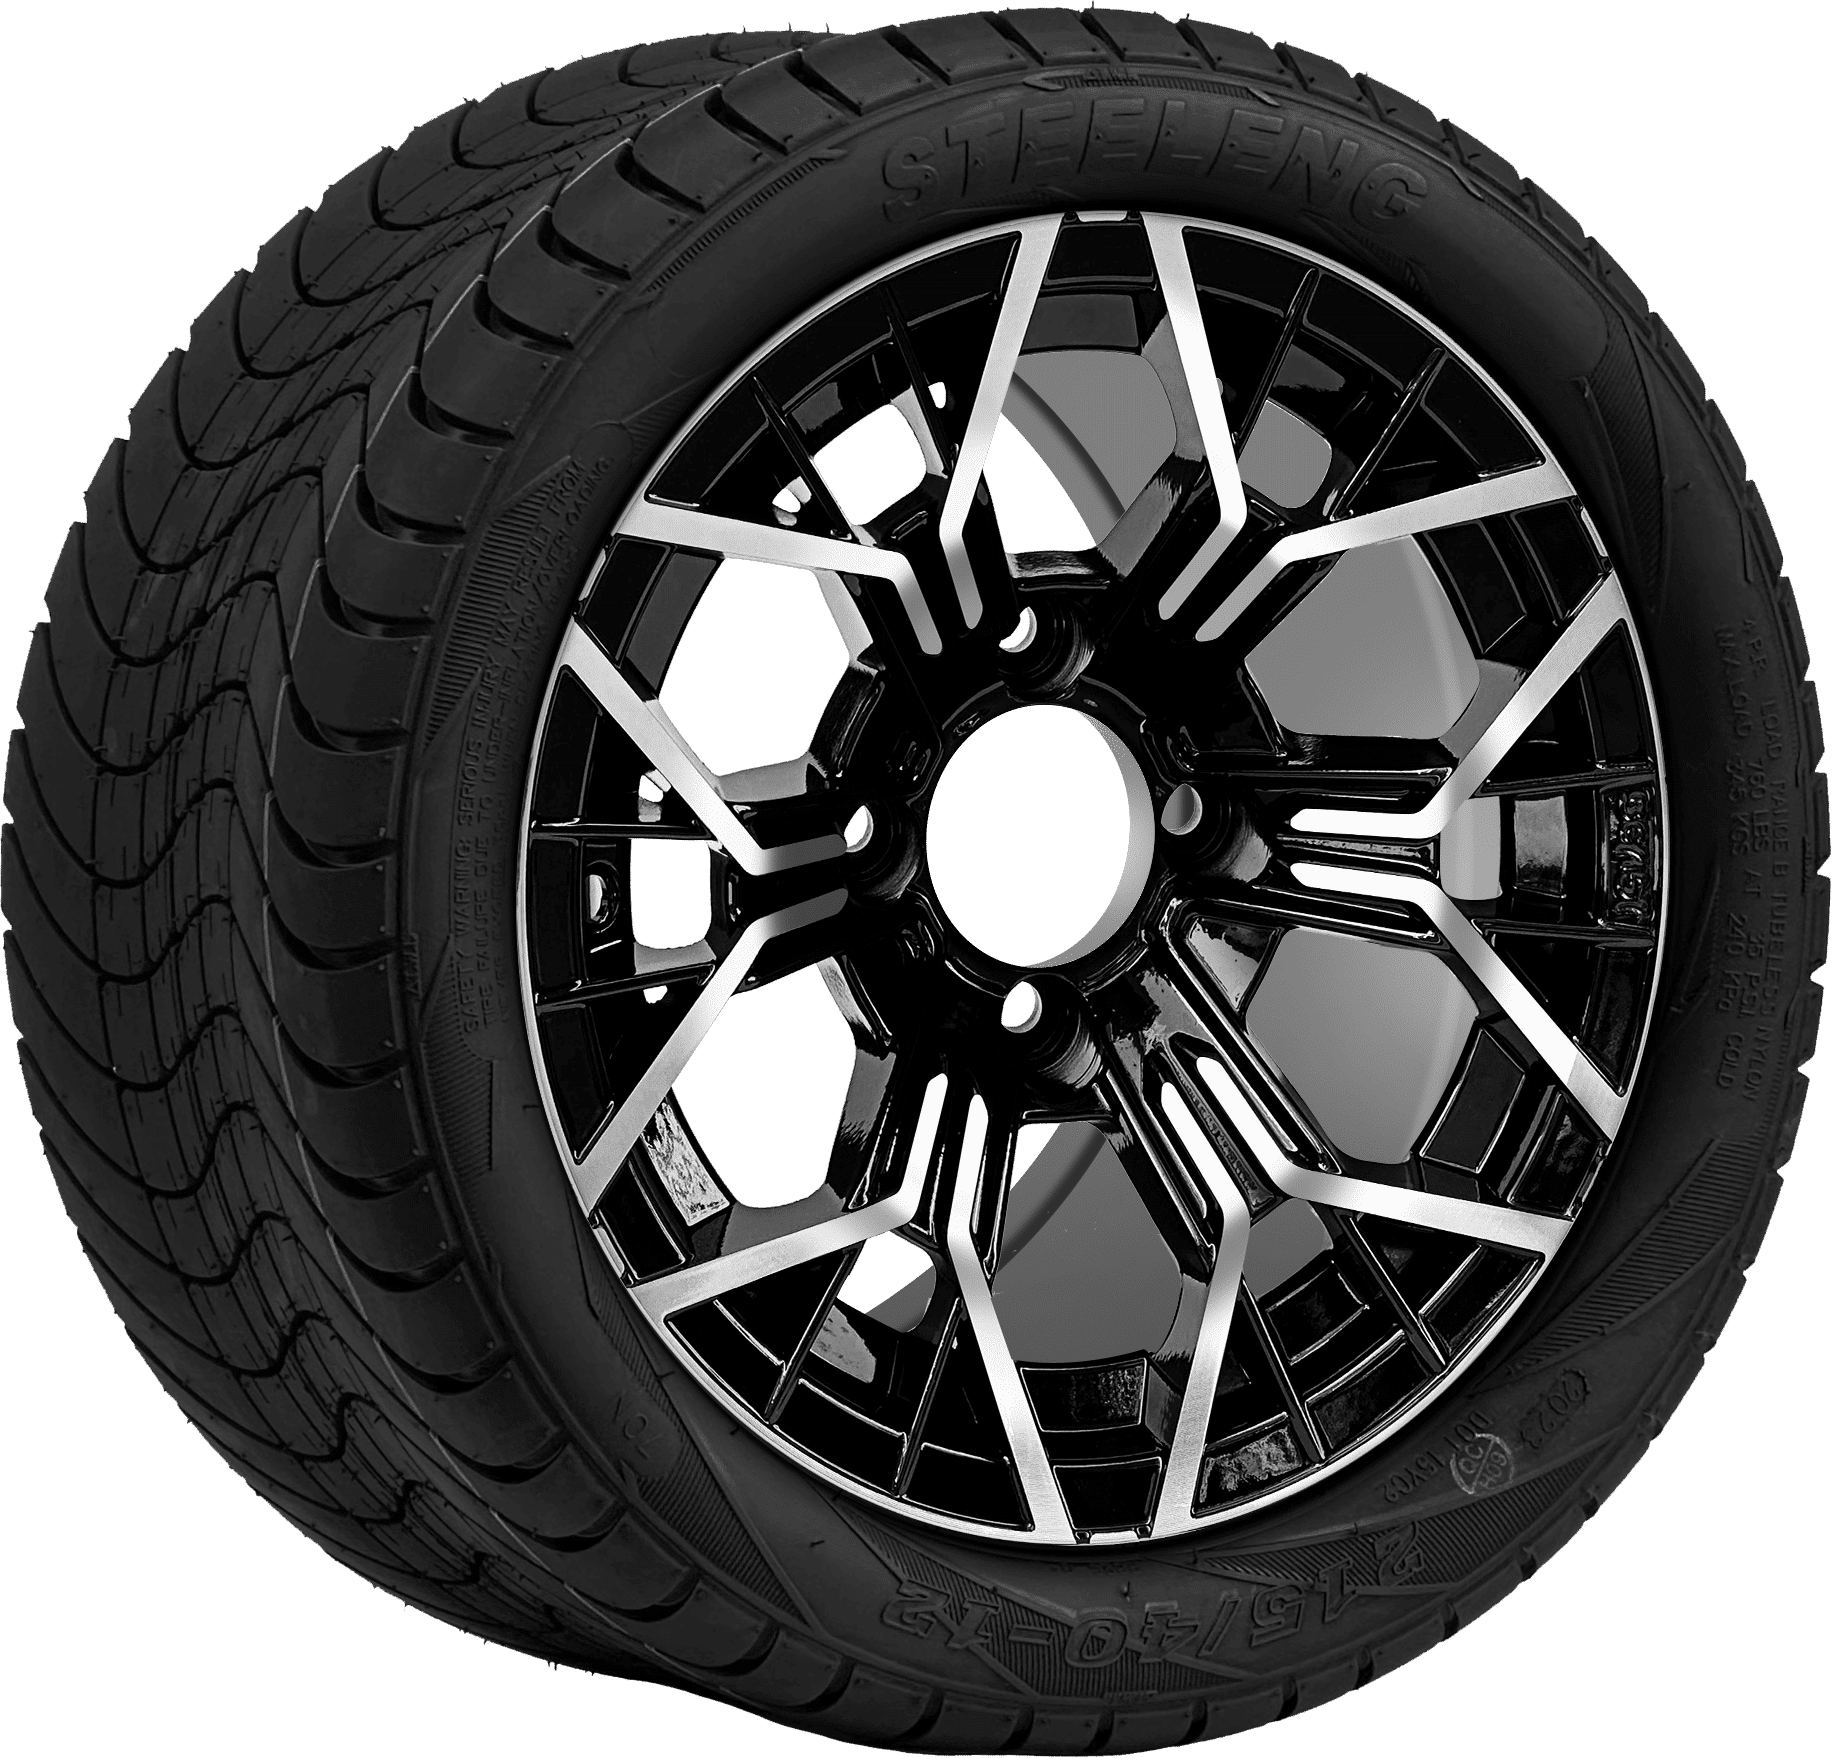 BNDL-TR1211-WH1267-CC0025-LN0001 12″ MANTIS MACHINED/BLACK WHEEL – ALUMINUM ALLOY / STEELENG 215/40-12 LOW PROFILE TIRE DOT APPROVED